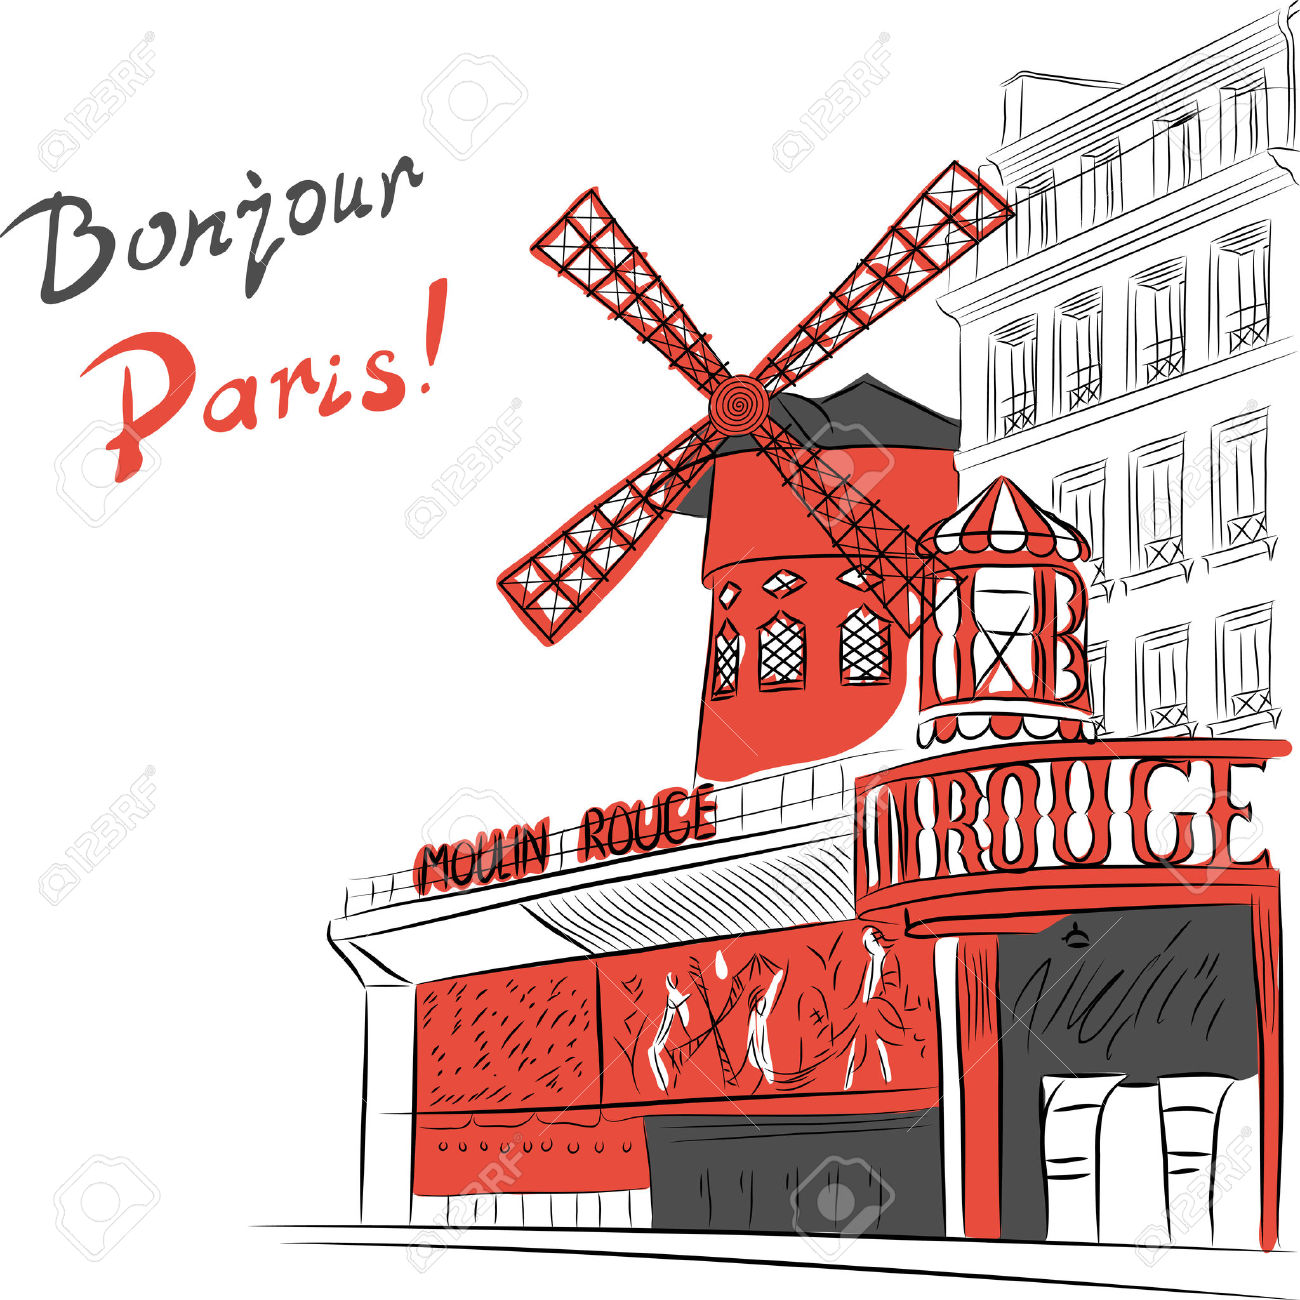 530 Moulin Rouge Stock Vector Illustration And Royalty Free Moulin.